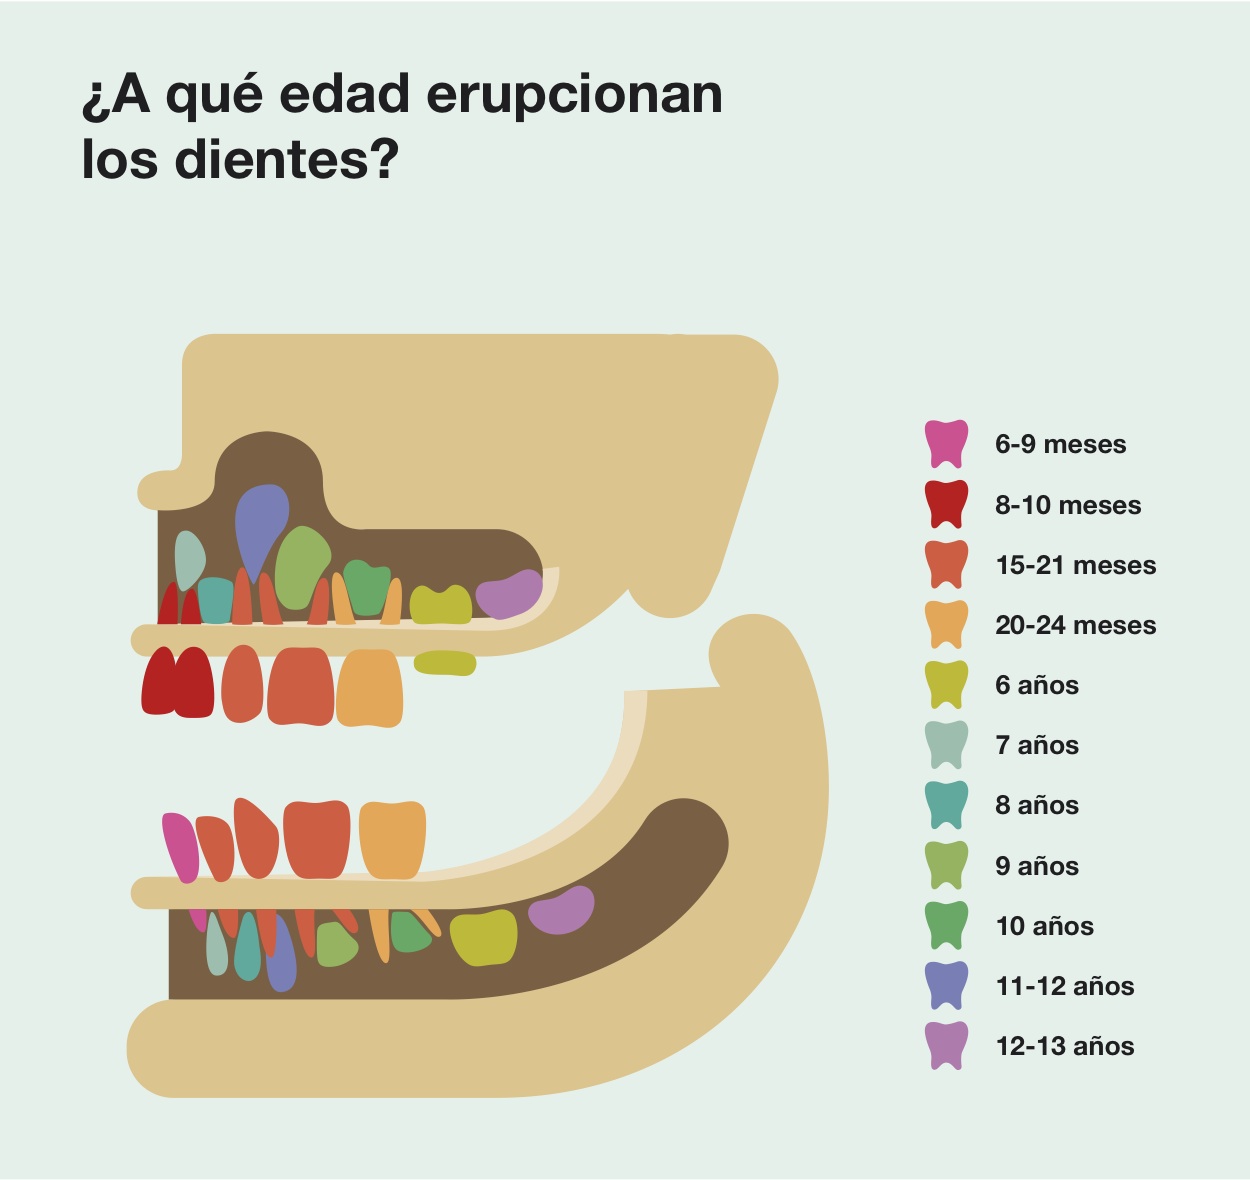 Approximate chronology of dental eruptive sequence